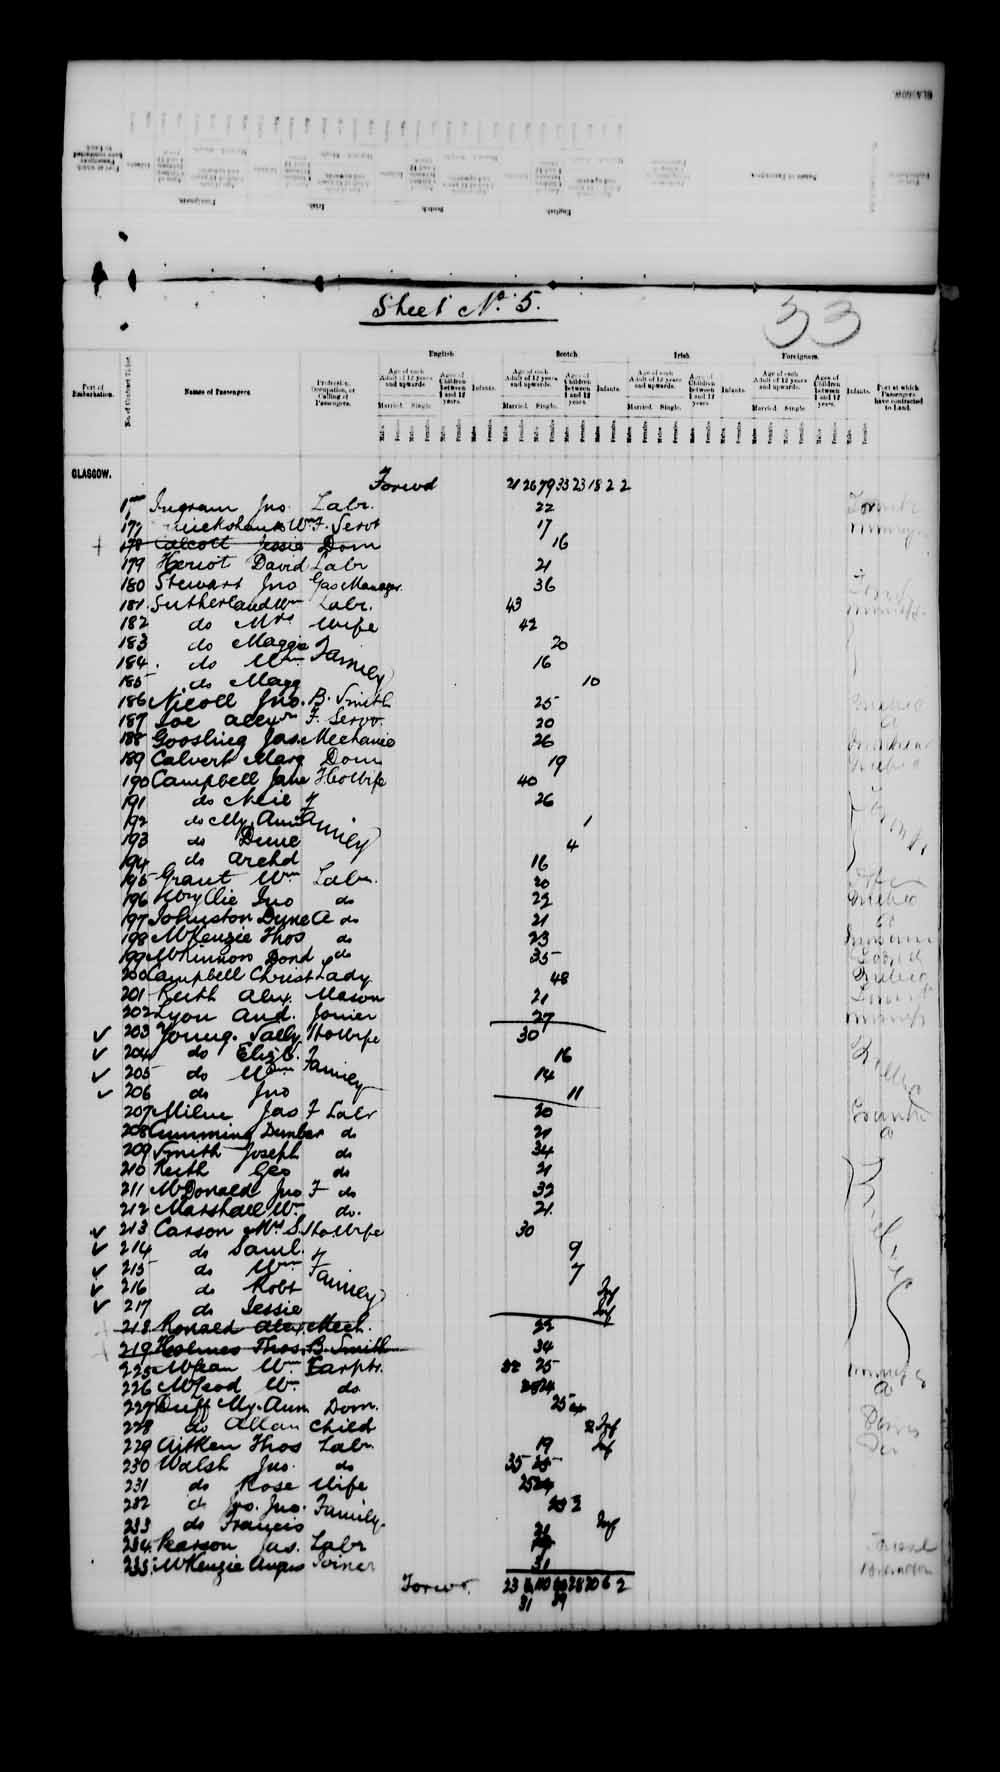 Digitized page of Passenger Lists for Image No.: e003543093